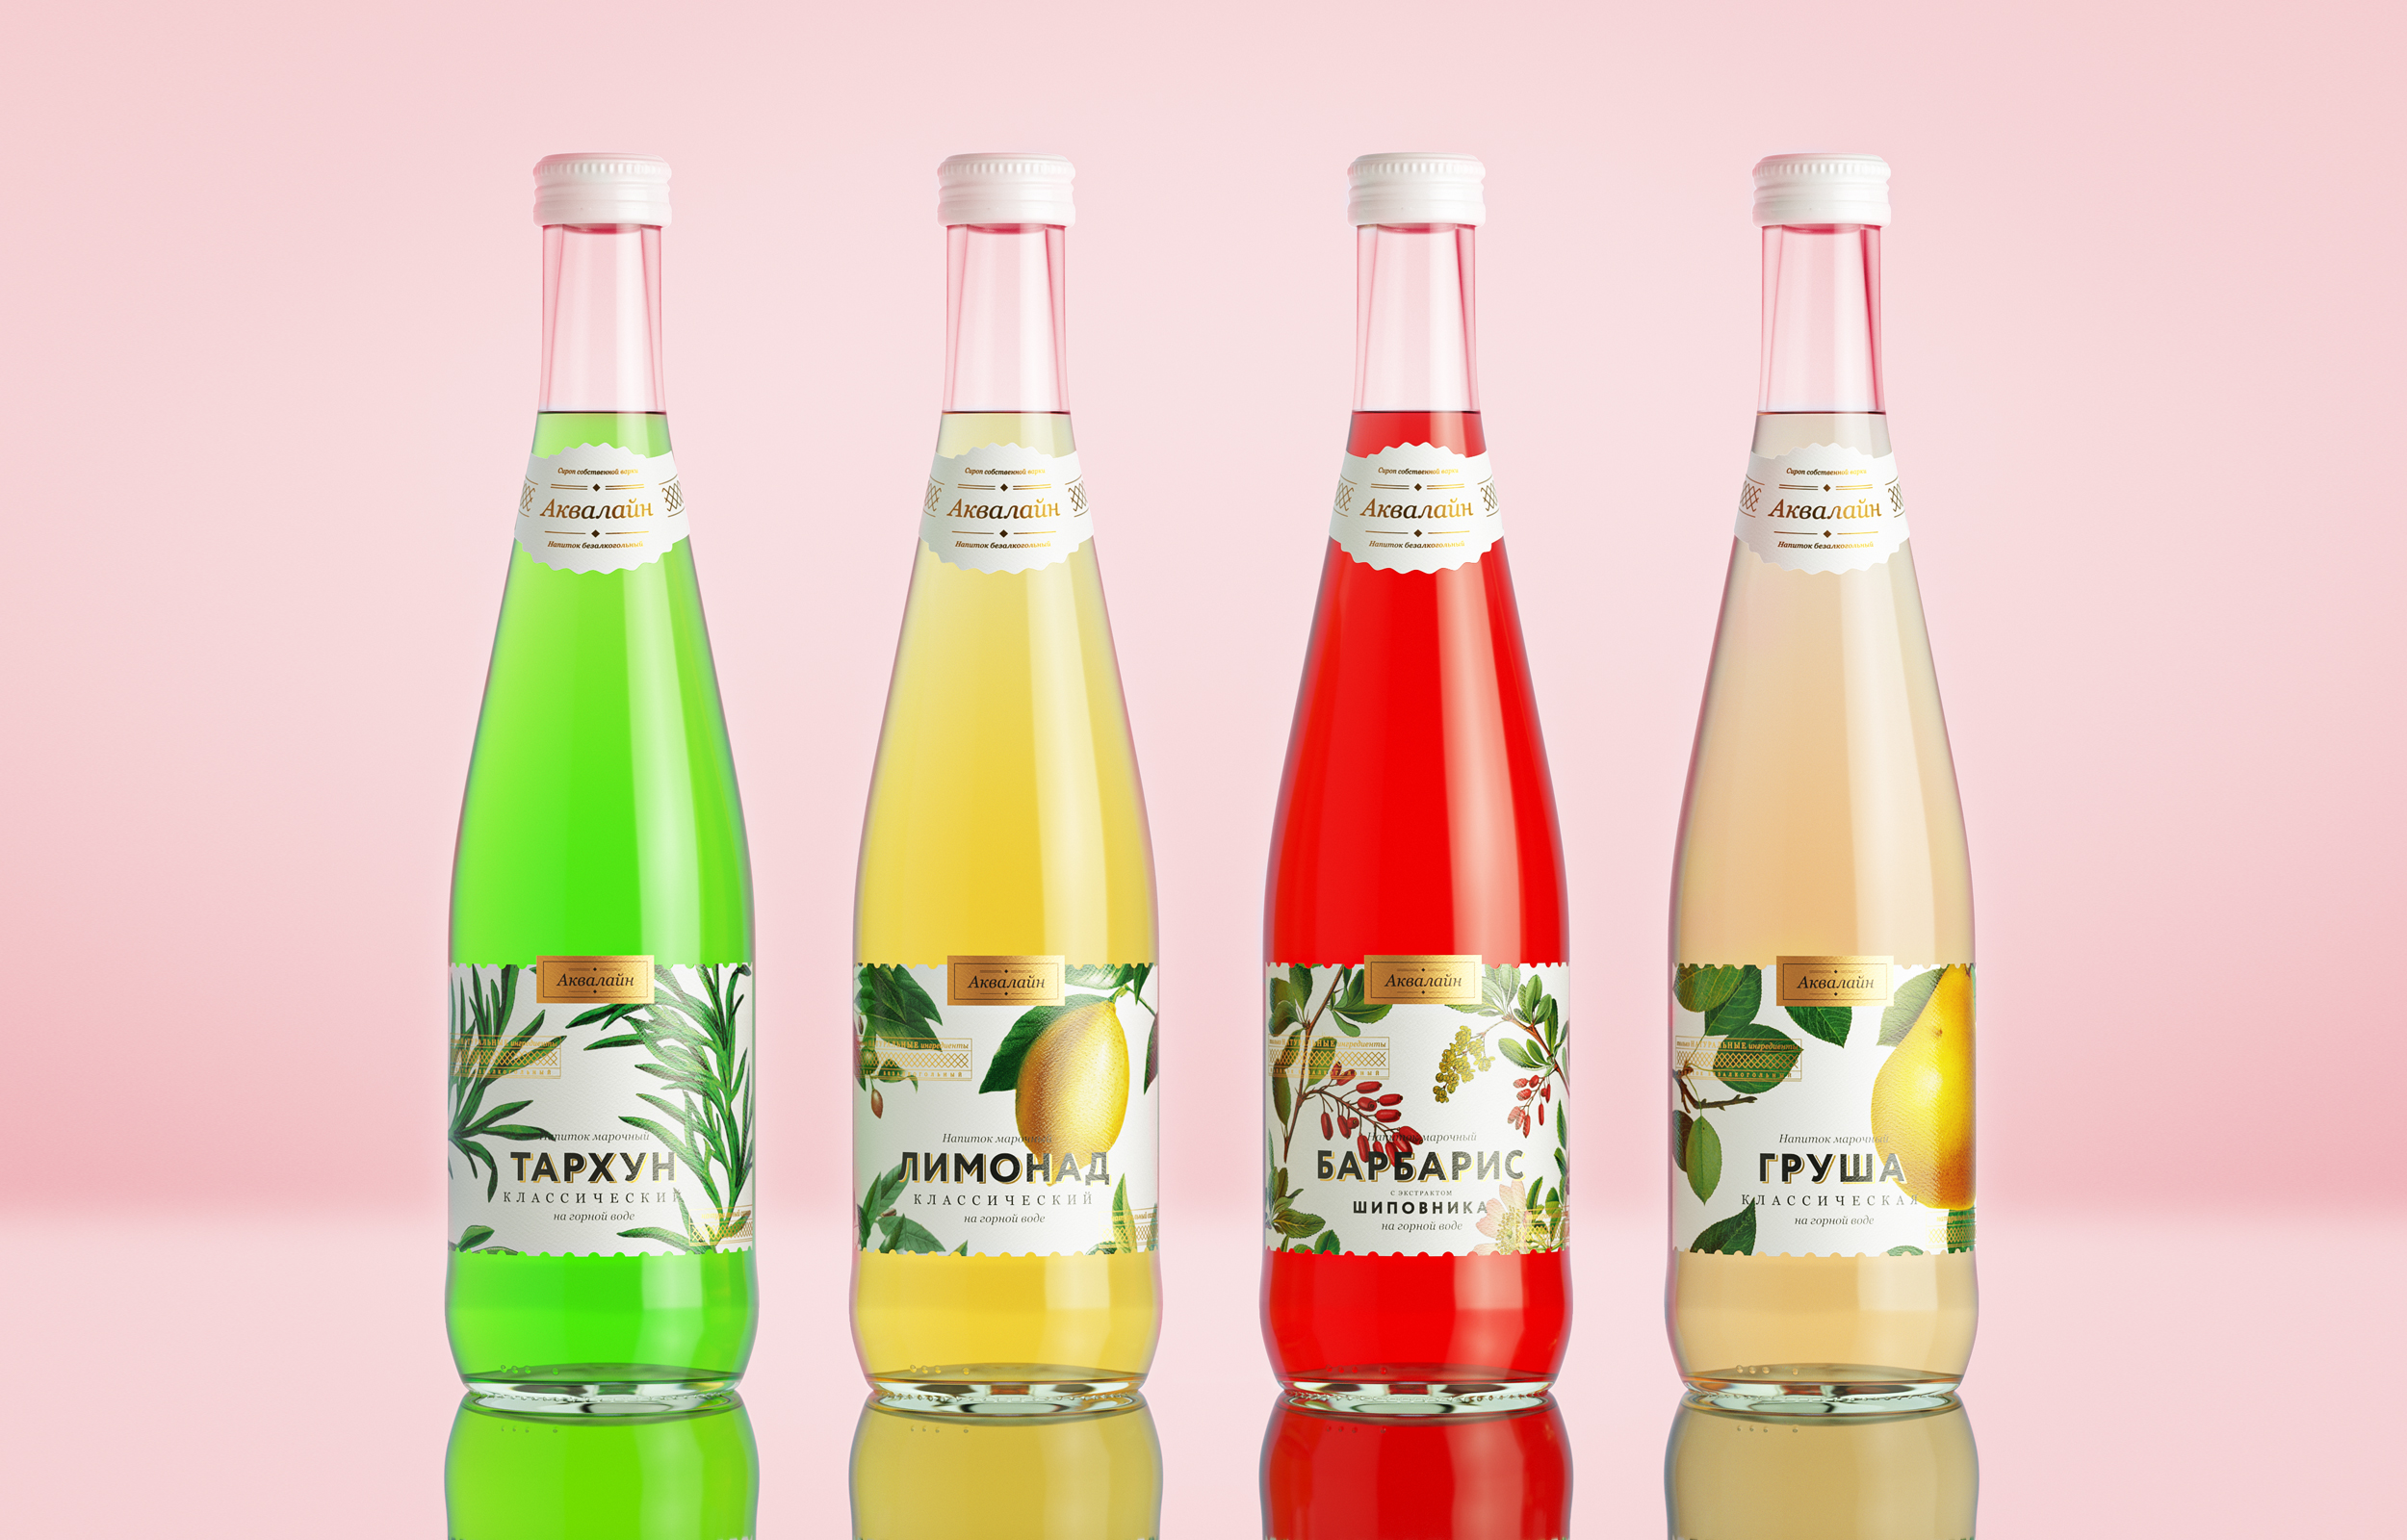 Ohmybrand Brand Development and Packaging Design for Aqualine Fizzy ...